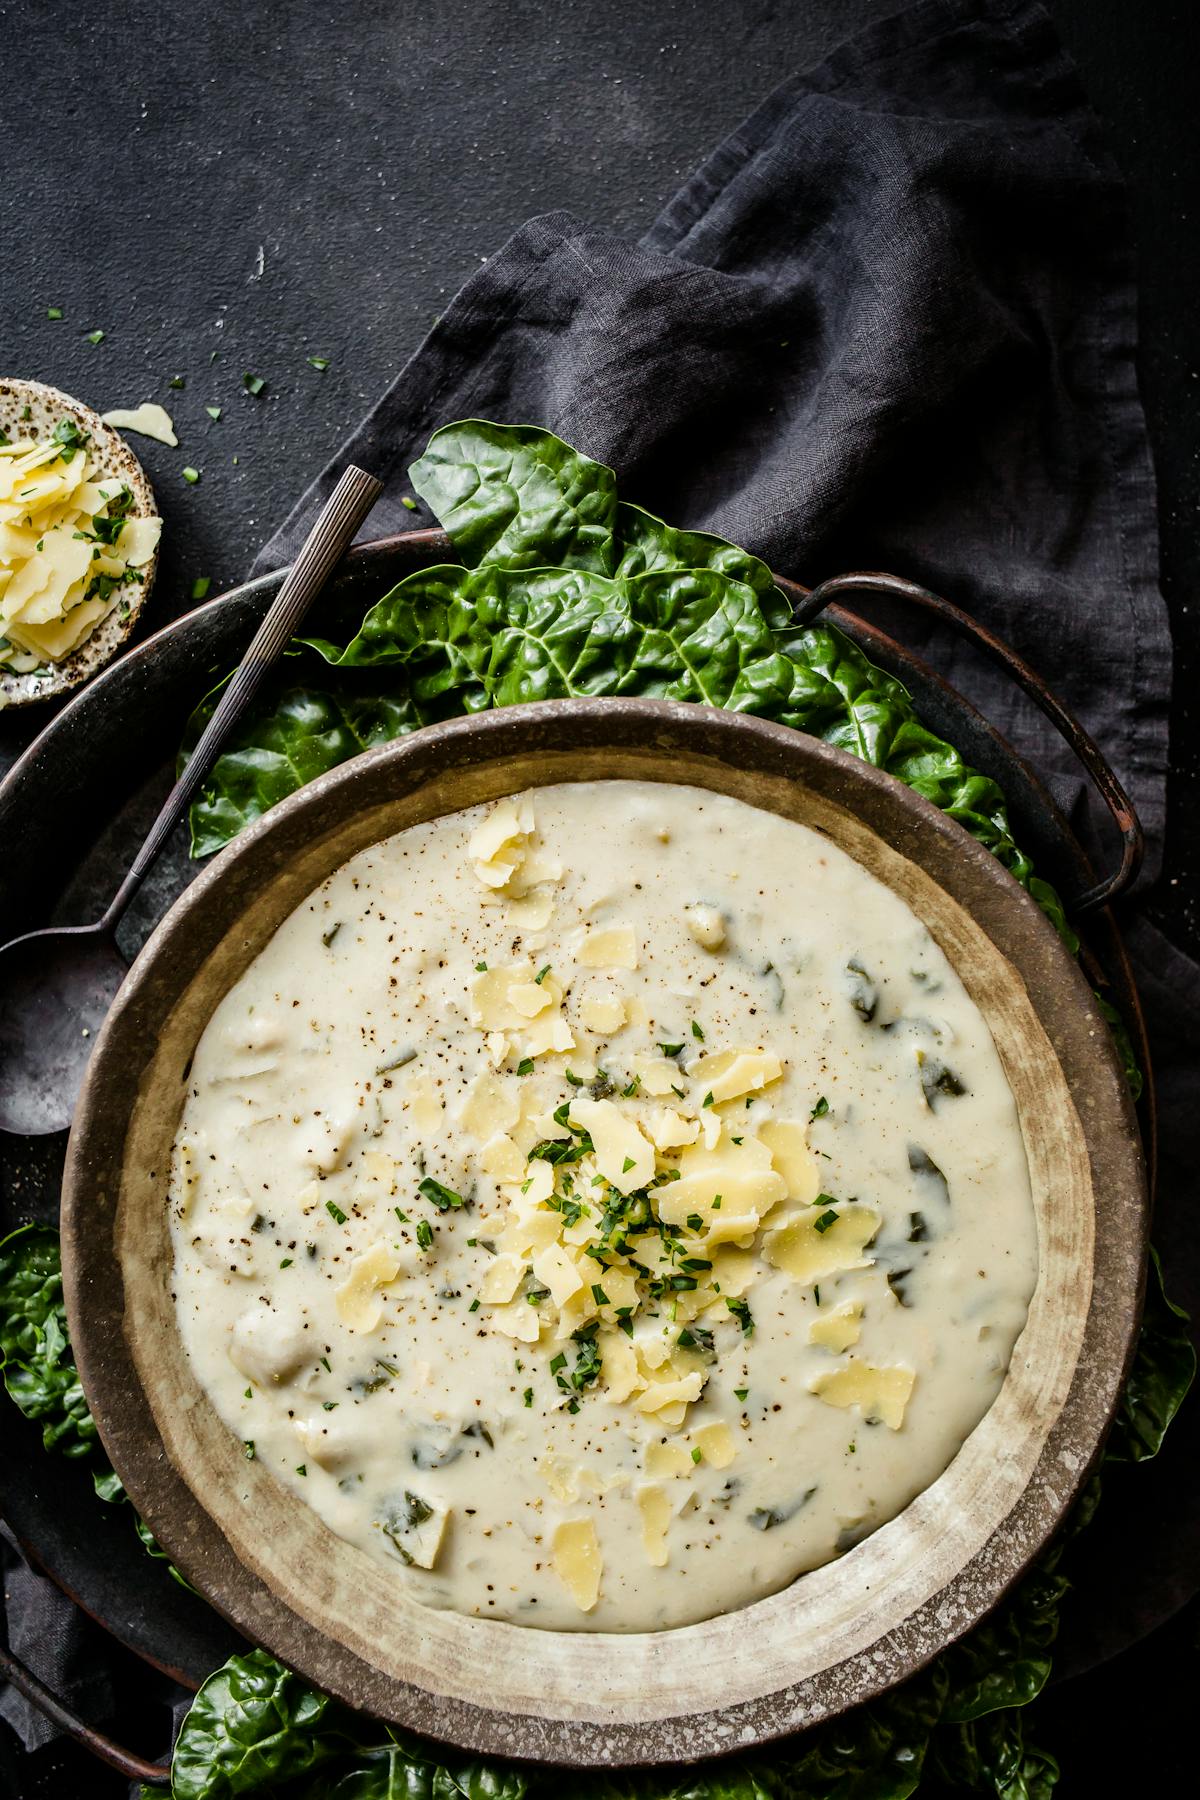 Low-carb spinach and artichoke soup